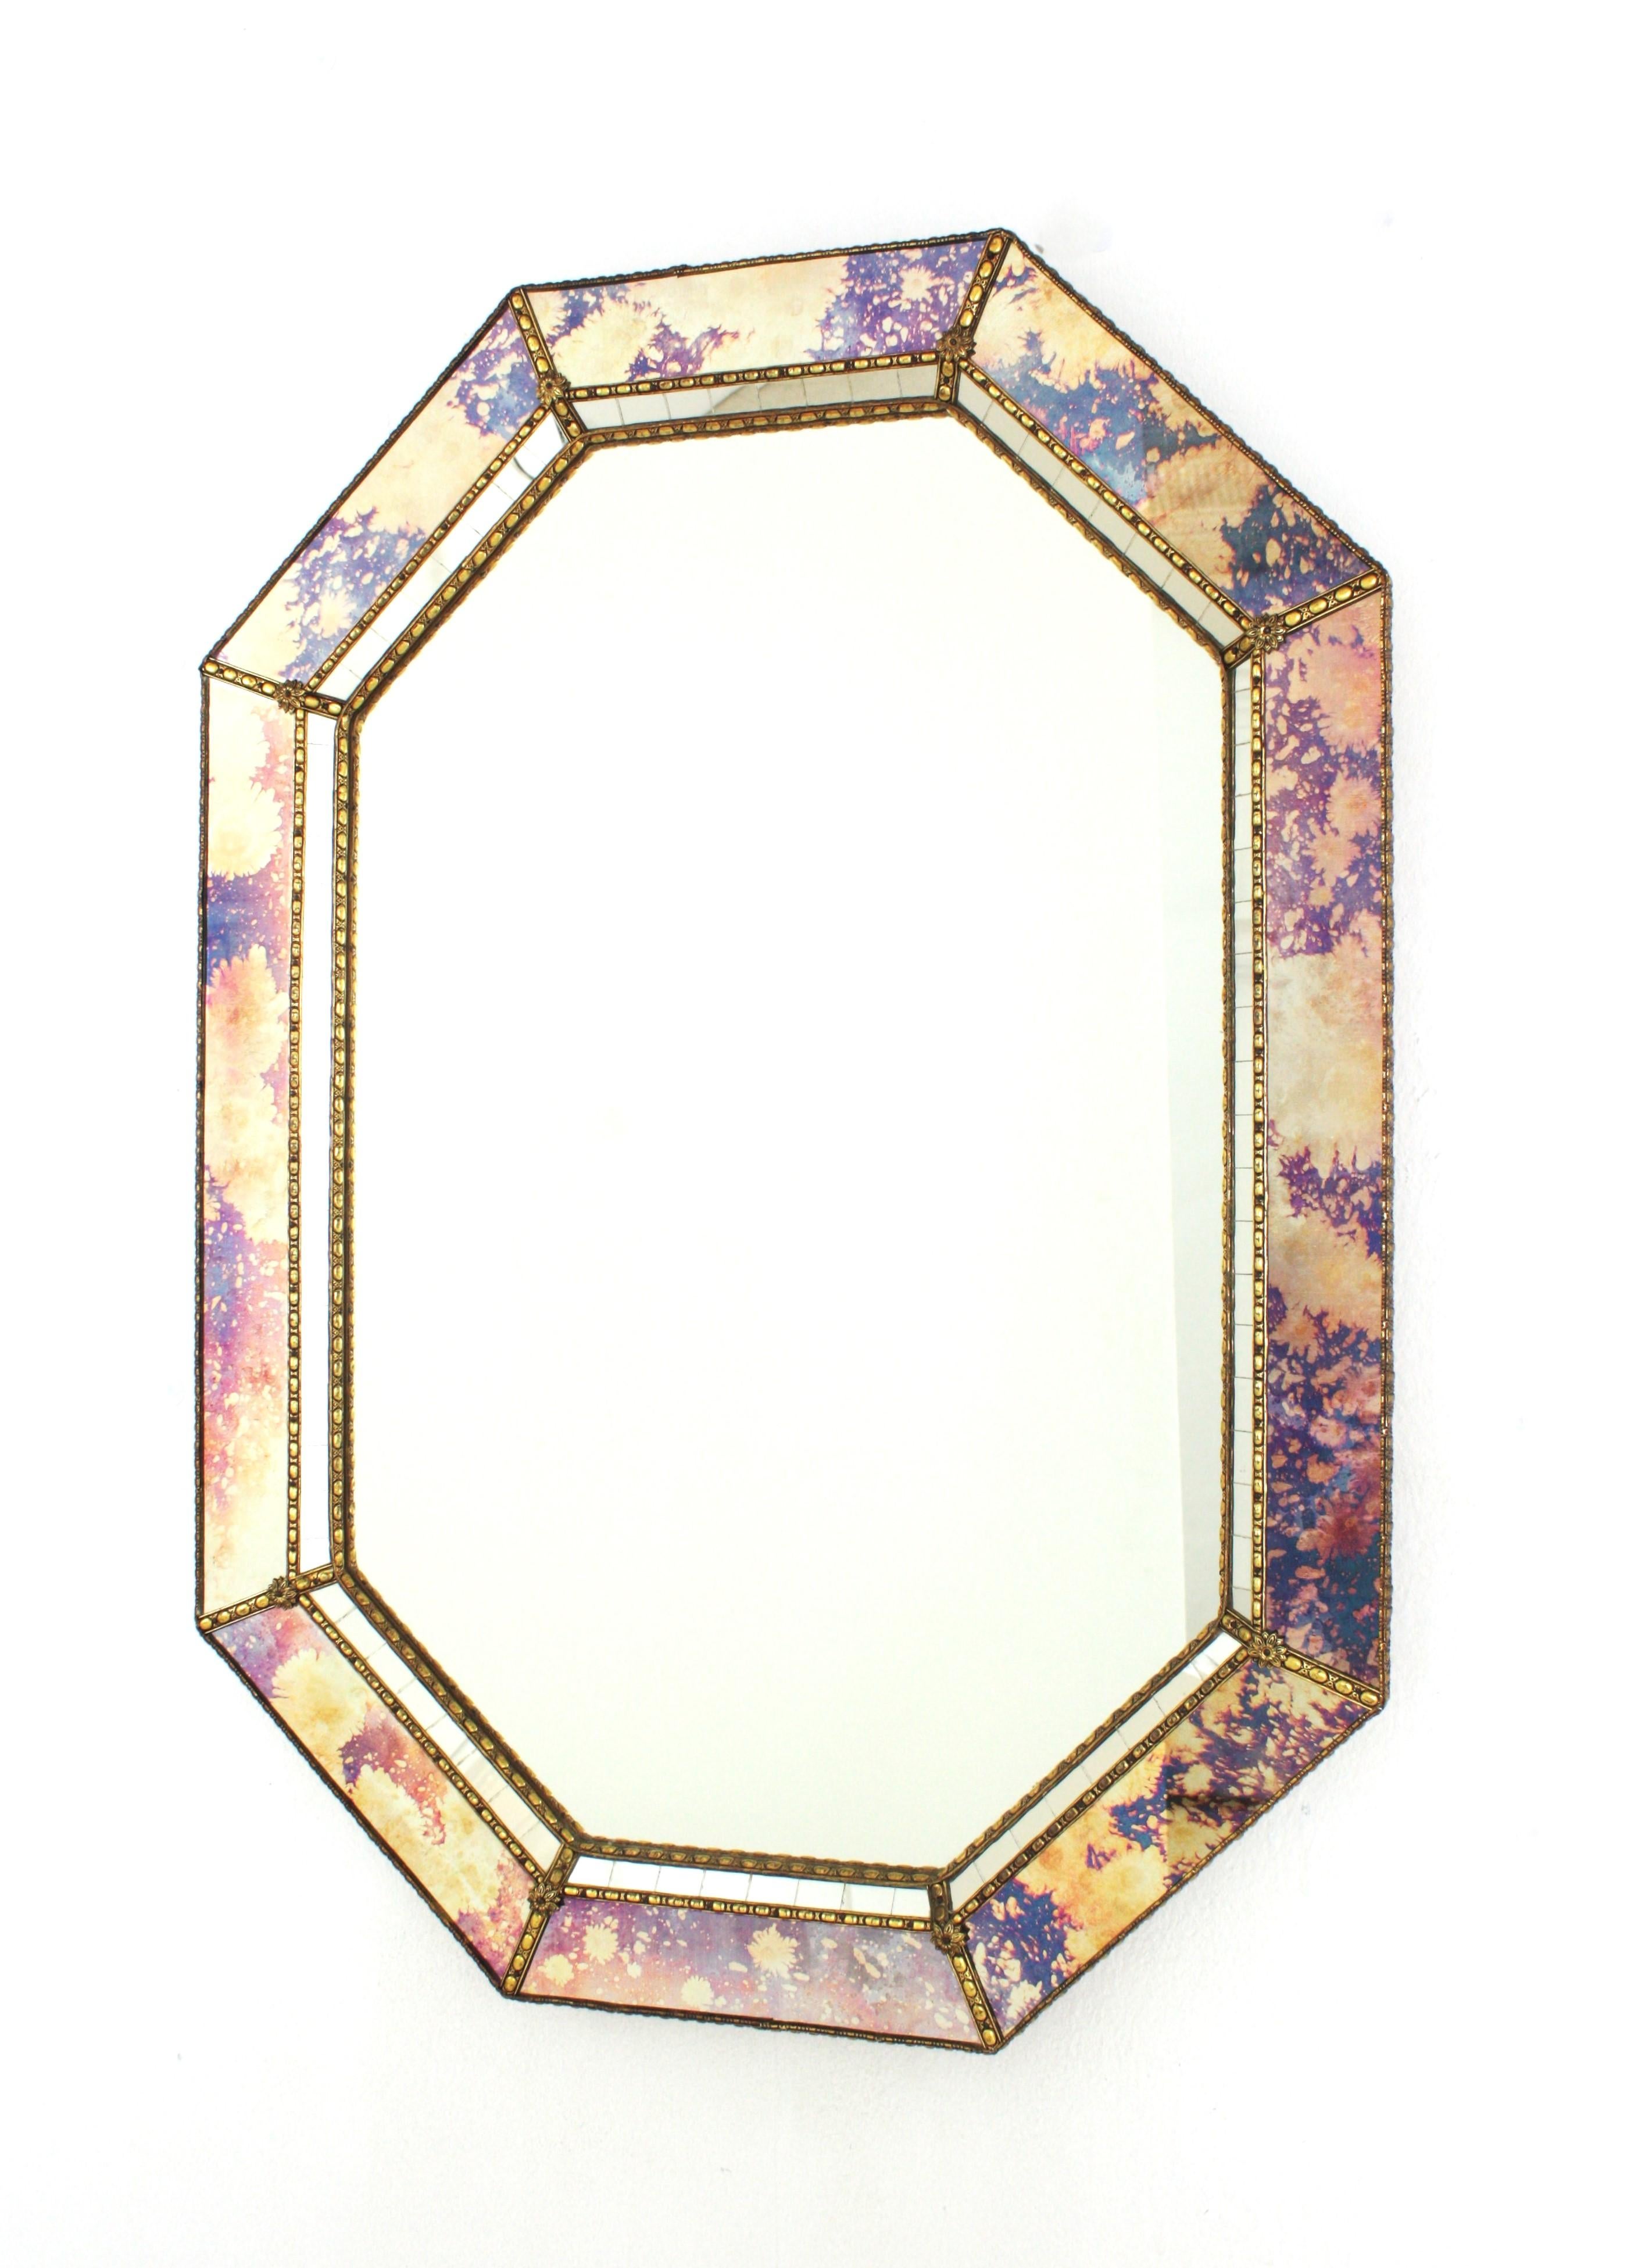 Octagonal Venetian Style Mirrors with Pink Purple Glass & Brass Details, Pair For Sale 1